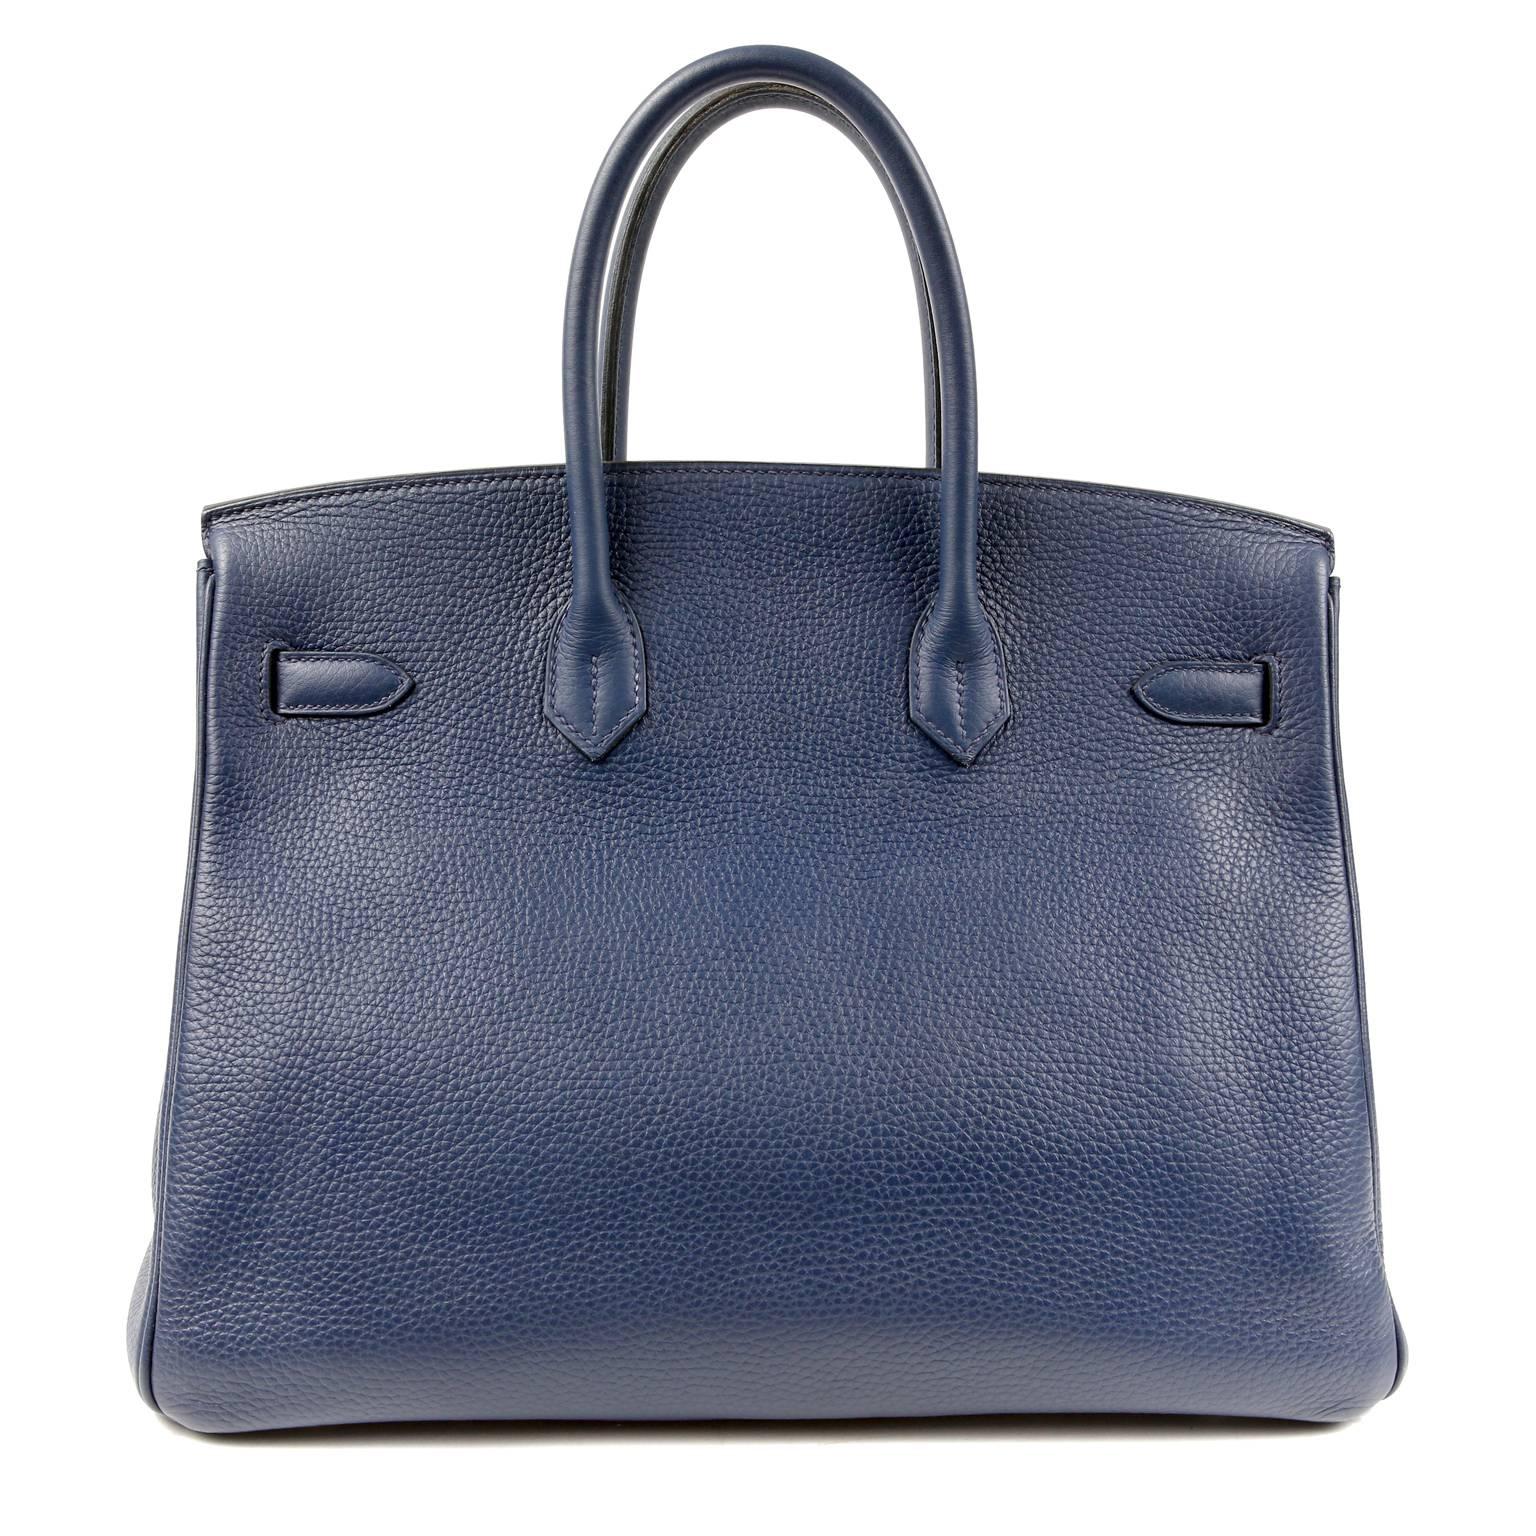 Hermès Indigo Togo 35 cm Birkin Bag- PRISTINE
 Hand stitched by skilled craftsmen, wait lists of a year or more are commonplace for the Hermès Birkin. They are considered the ultimate in luxury fashion. Indigo is a deep dark blue- perfectly wearable